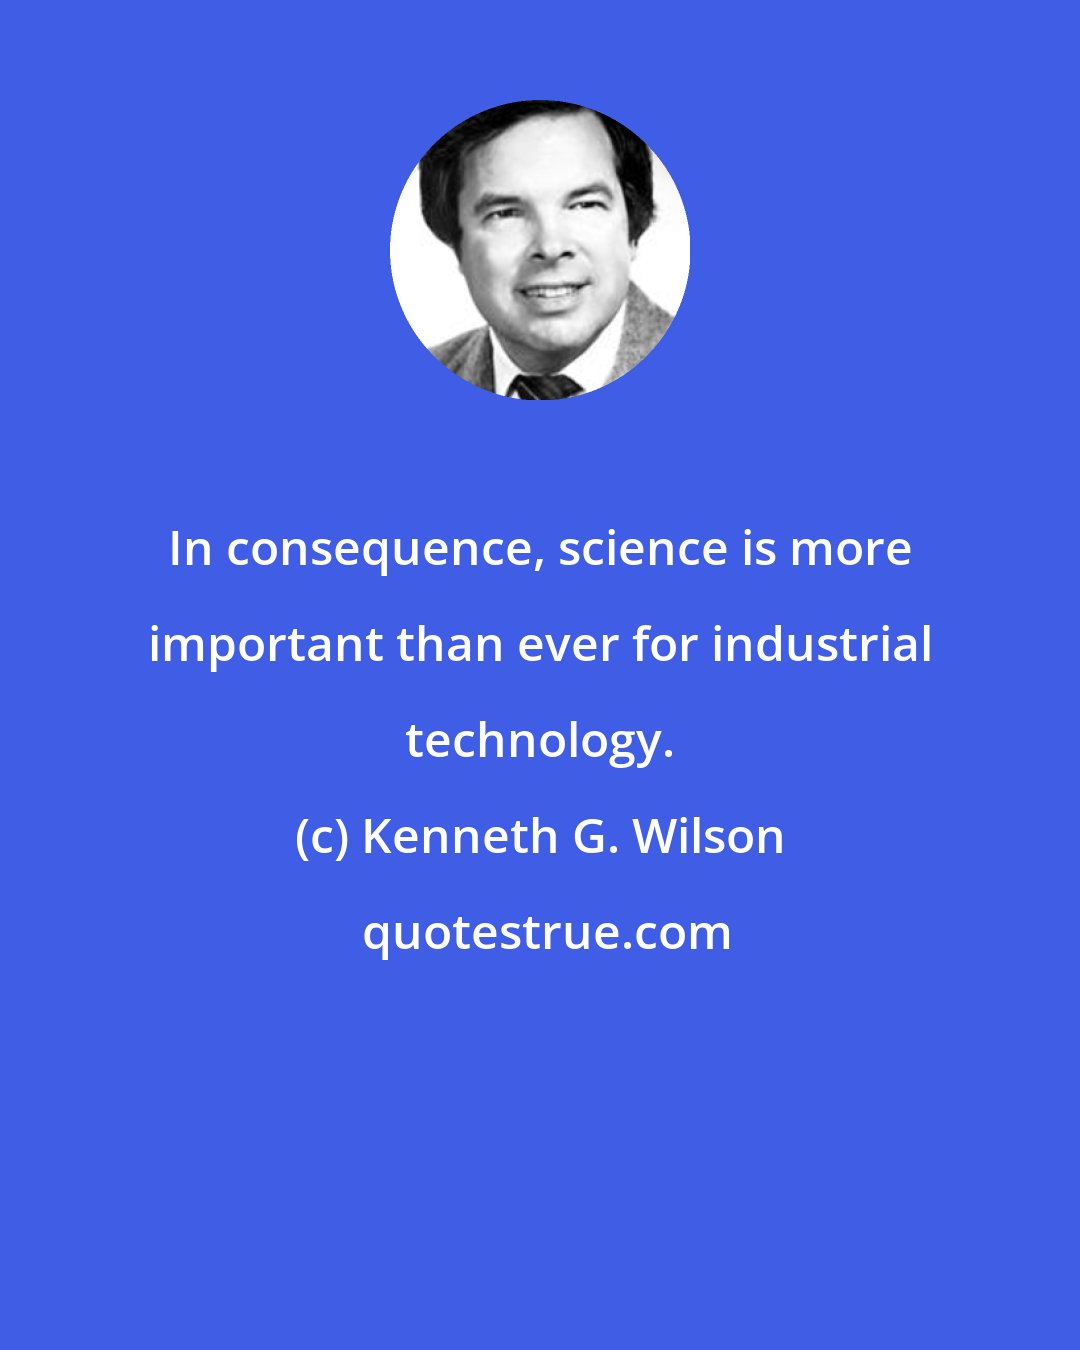 Kenneth G. Wilson: In consequence, science is more important than ever for industrial technology.